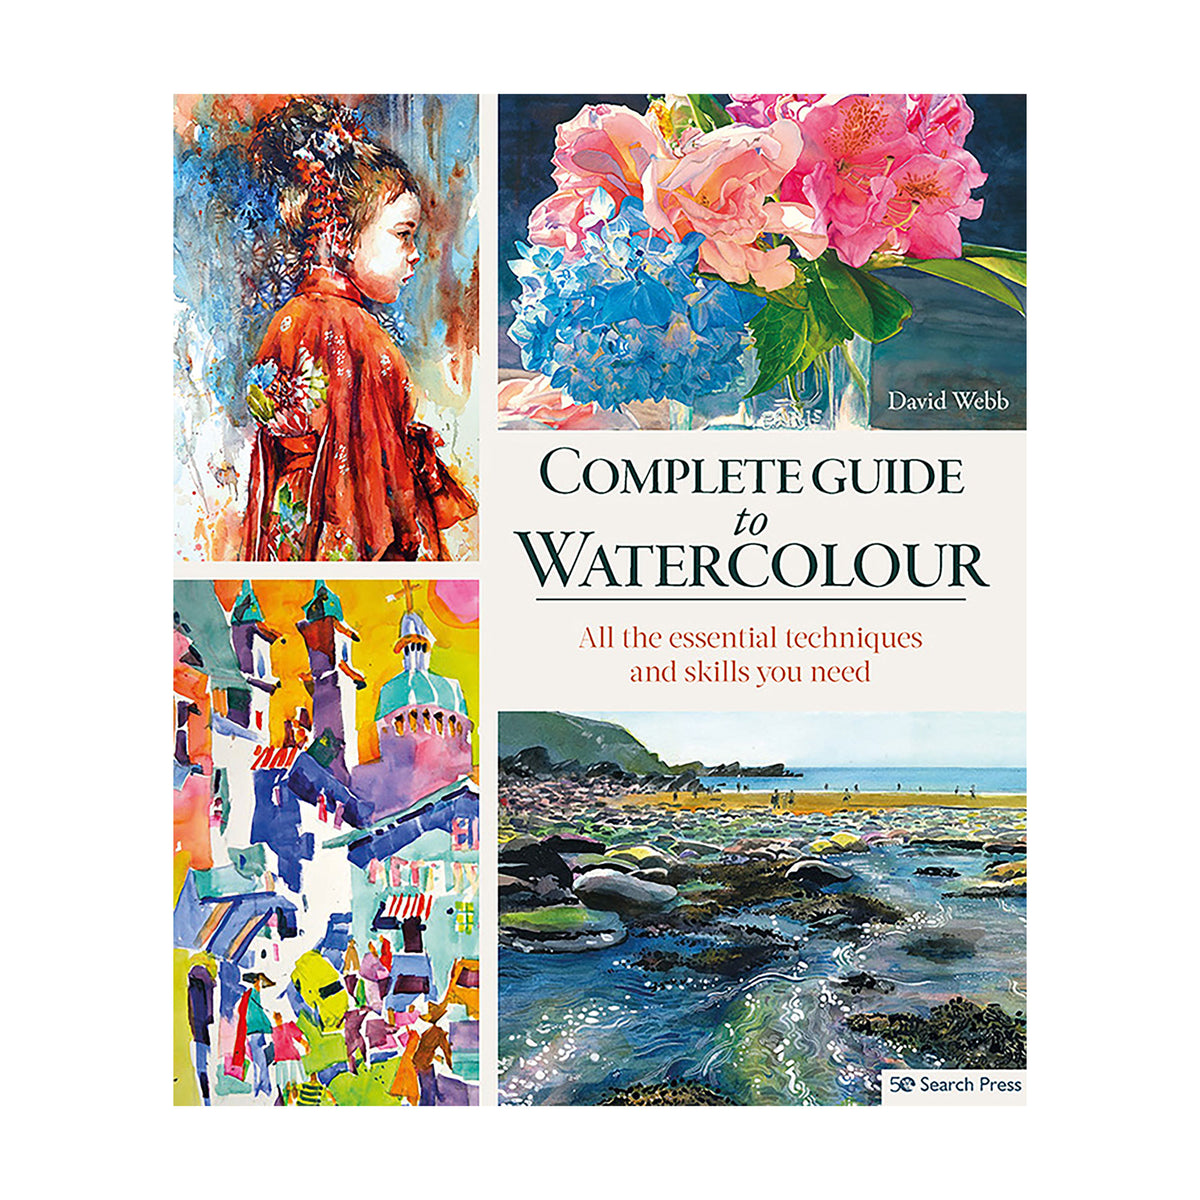 Complete Guide to Watercolour by David Webb